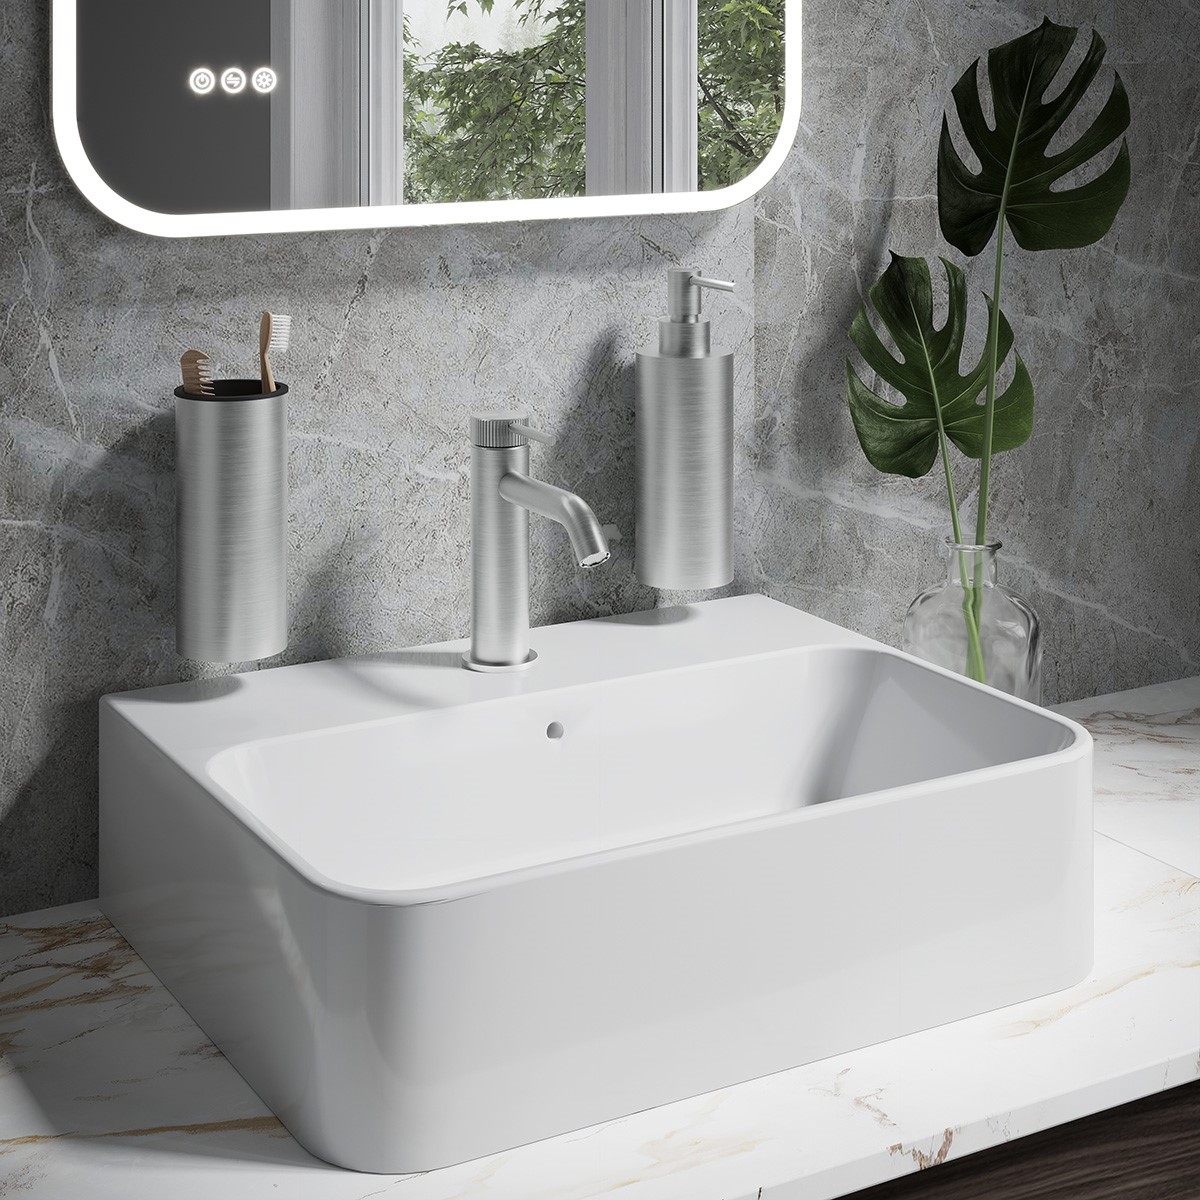 Crosswater 316 | Perfect contemporary bathrooms, discover Crosswater 316 taps, Crosswater 316 showers, Crosswater 316 bathroom accessories and more for a coordinated statement.